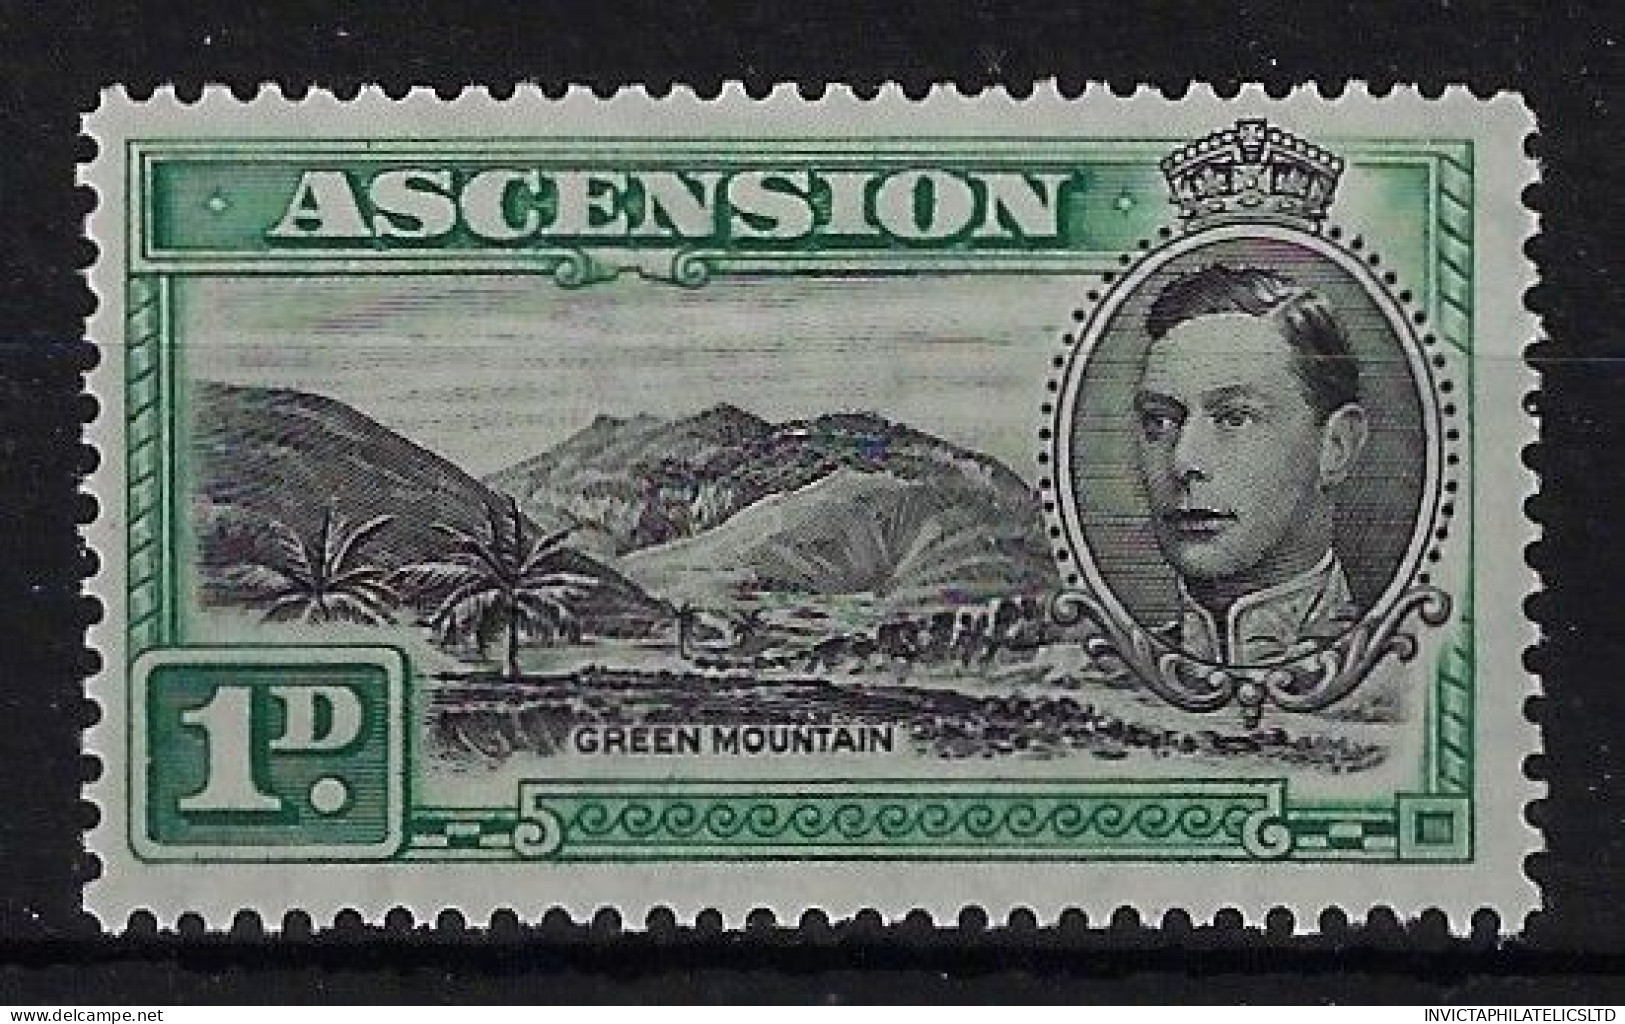 ASCENSION SG39, 1D GREEN MOUNTAIN, MOUNTED MINT - Ascension